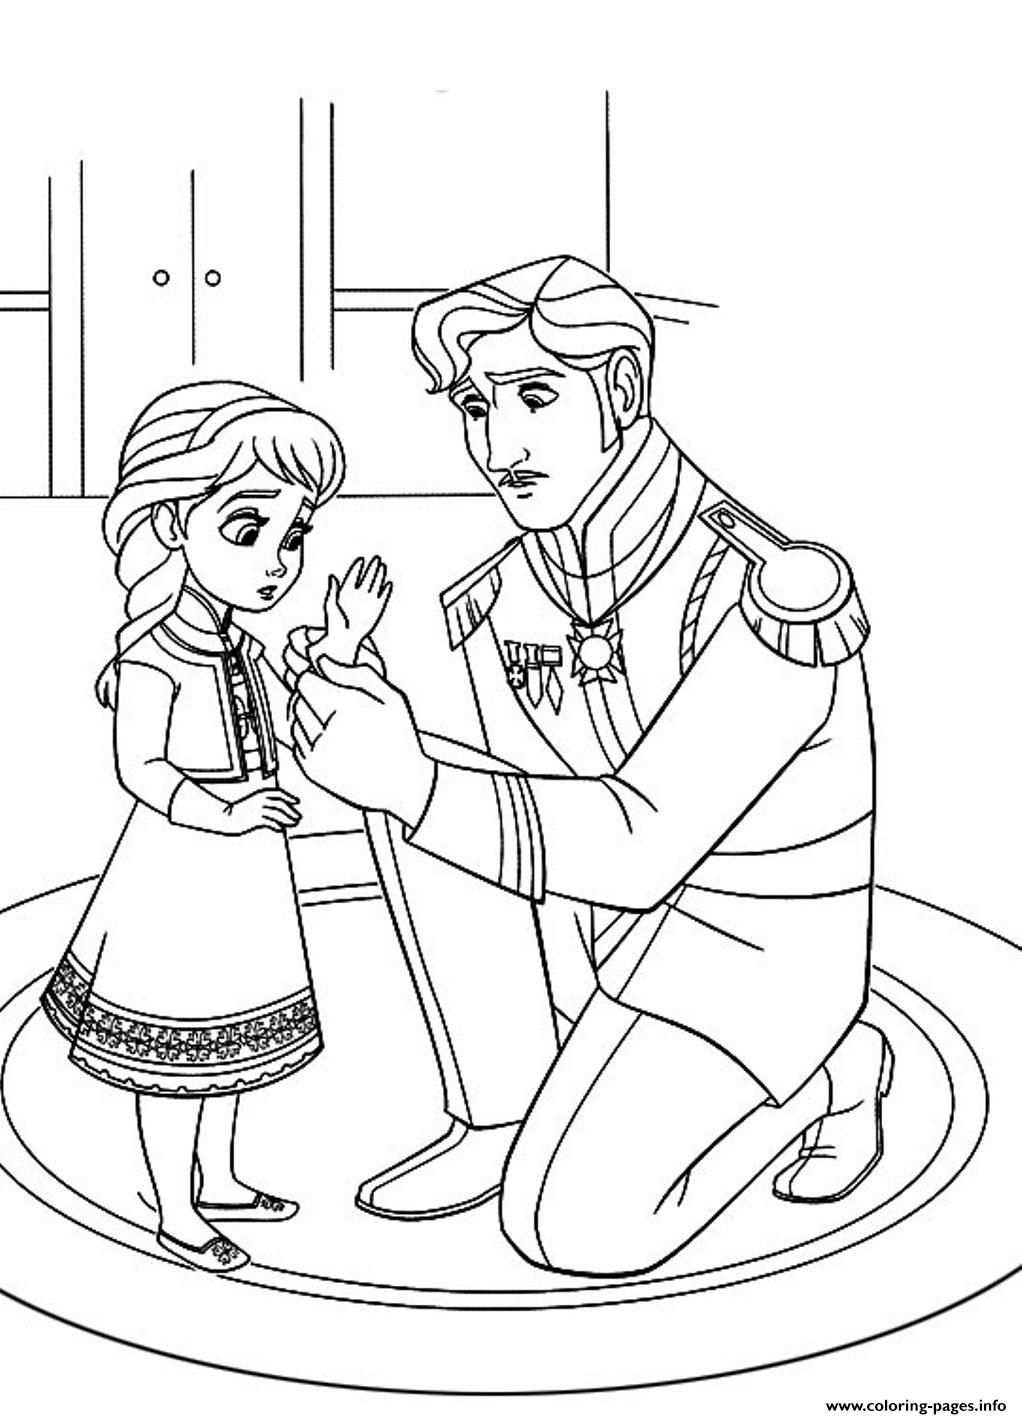 Print Free Frozen D500 Coloring Pages With Images Elsa